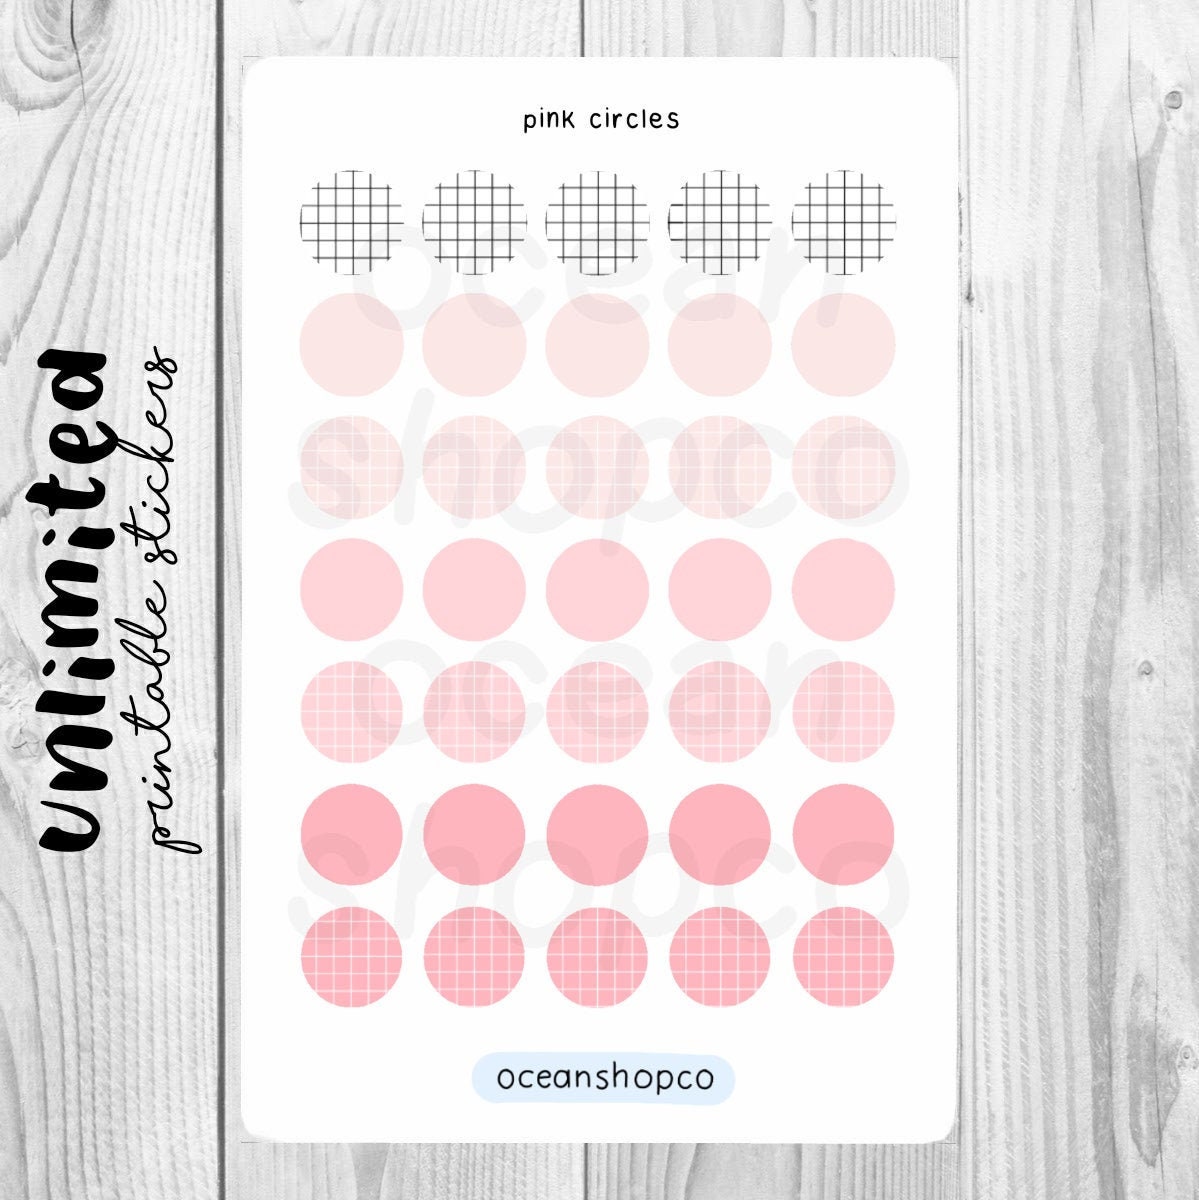 pink circle stickers pink monochrome circles aesthetic etsy